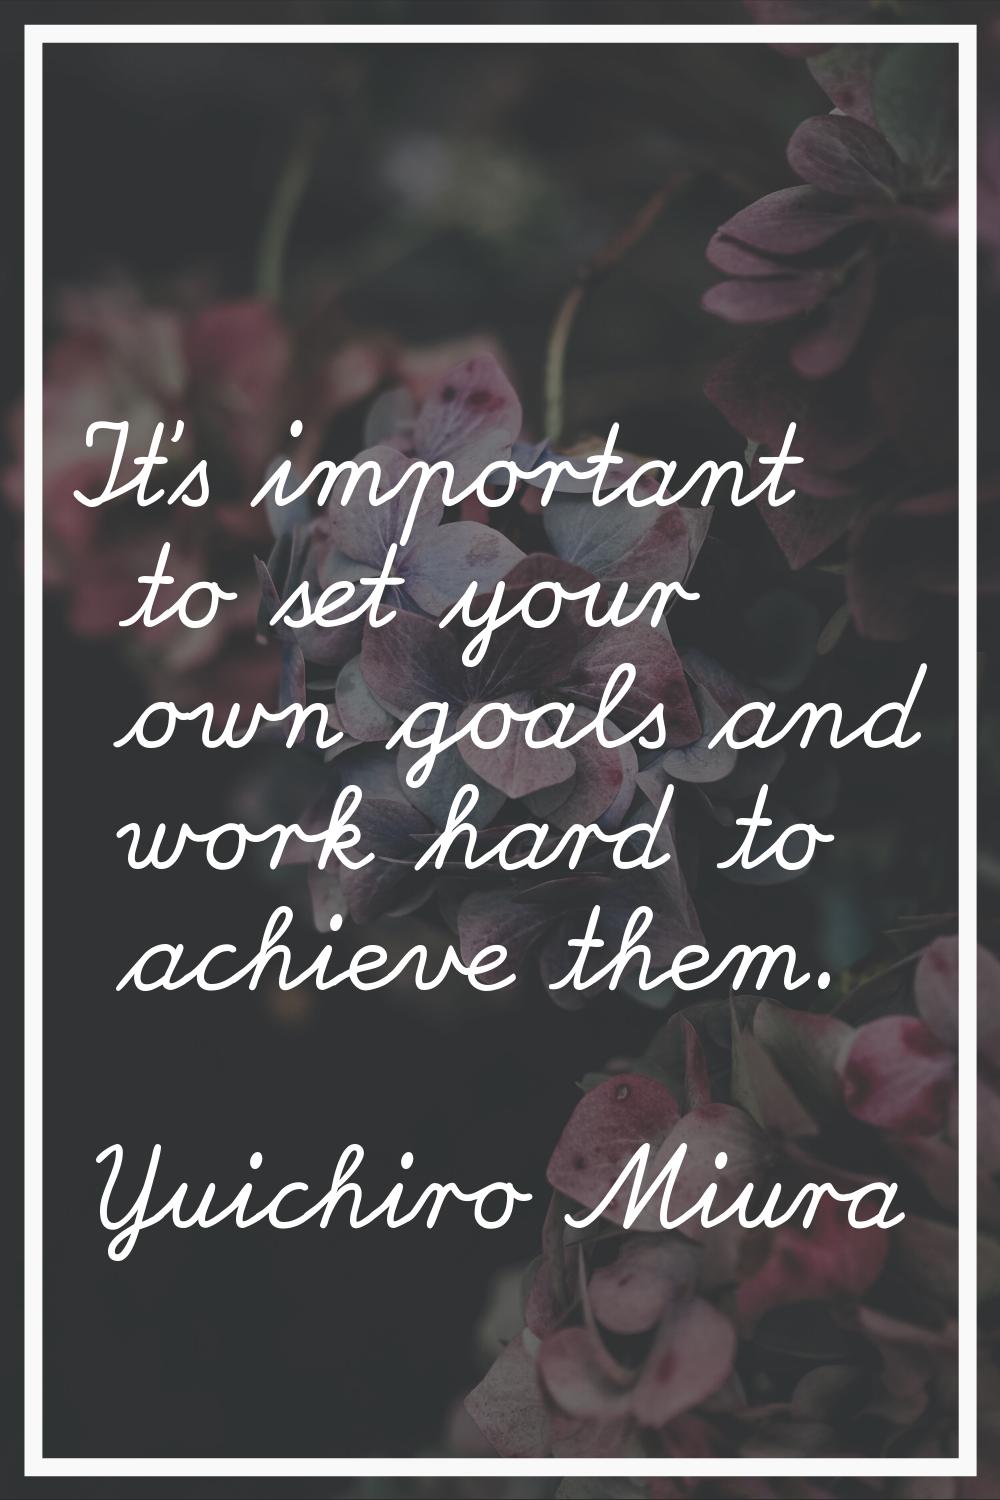 It's important to set your own goals and work hard to achieve them.